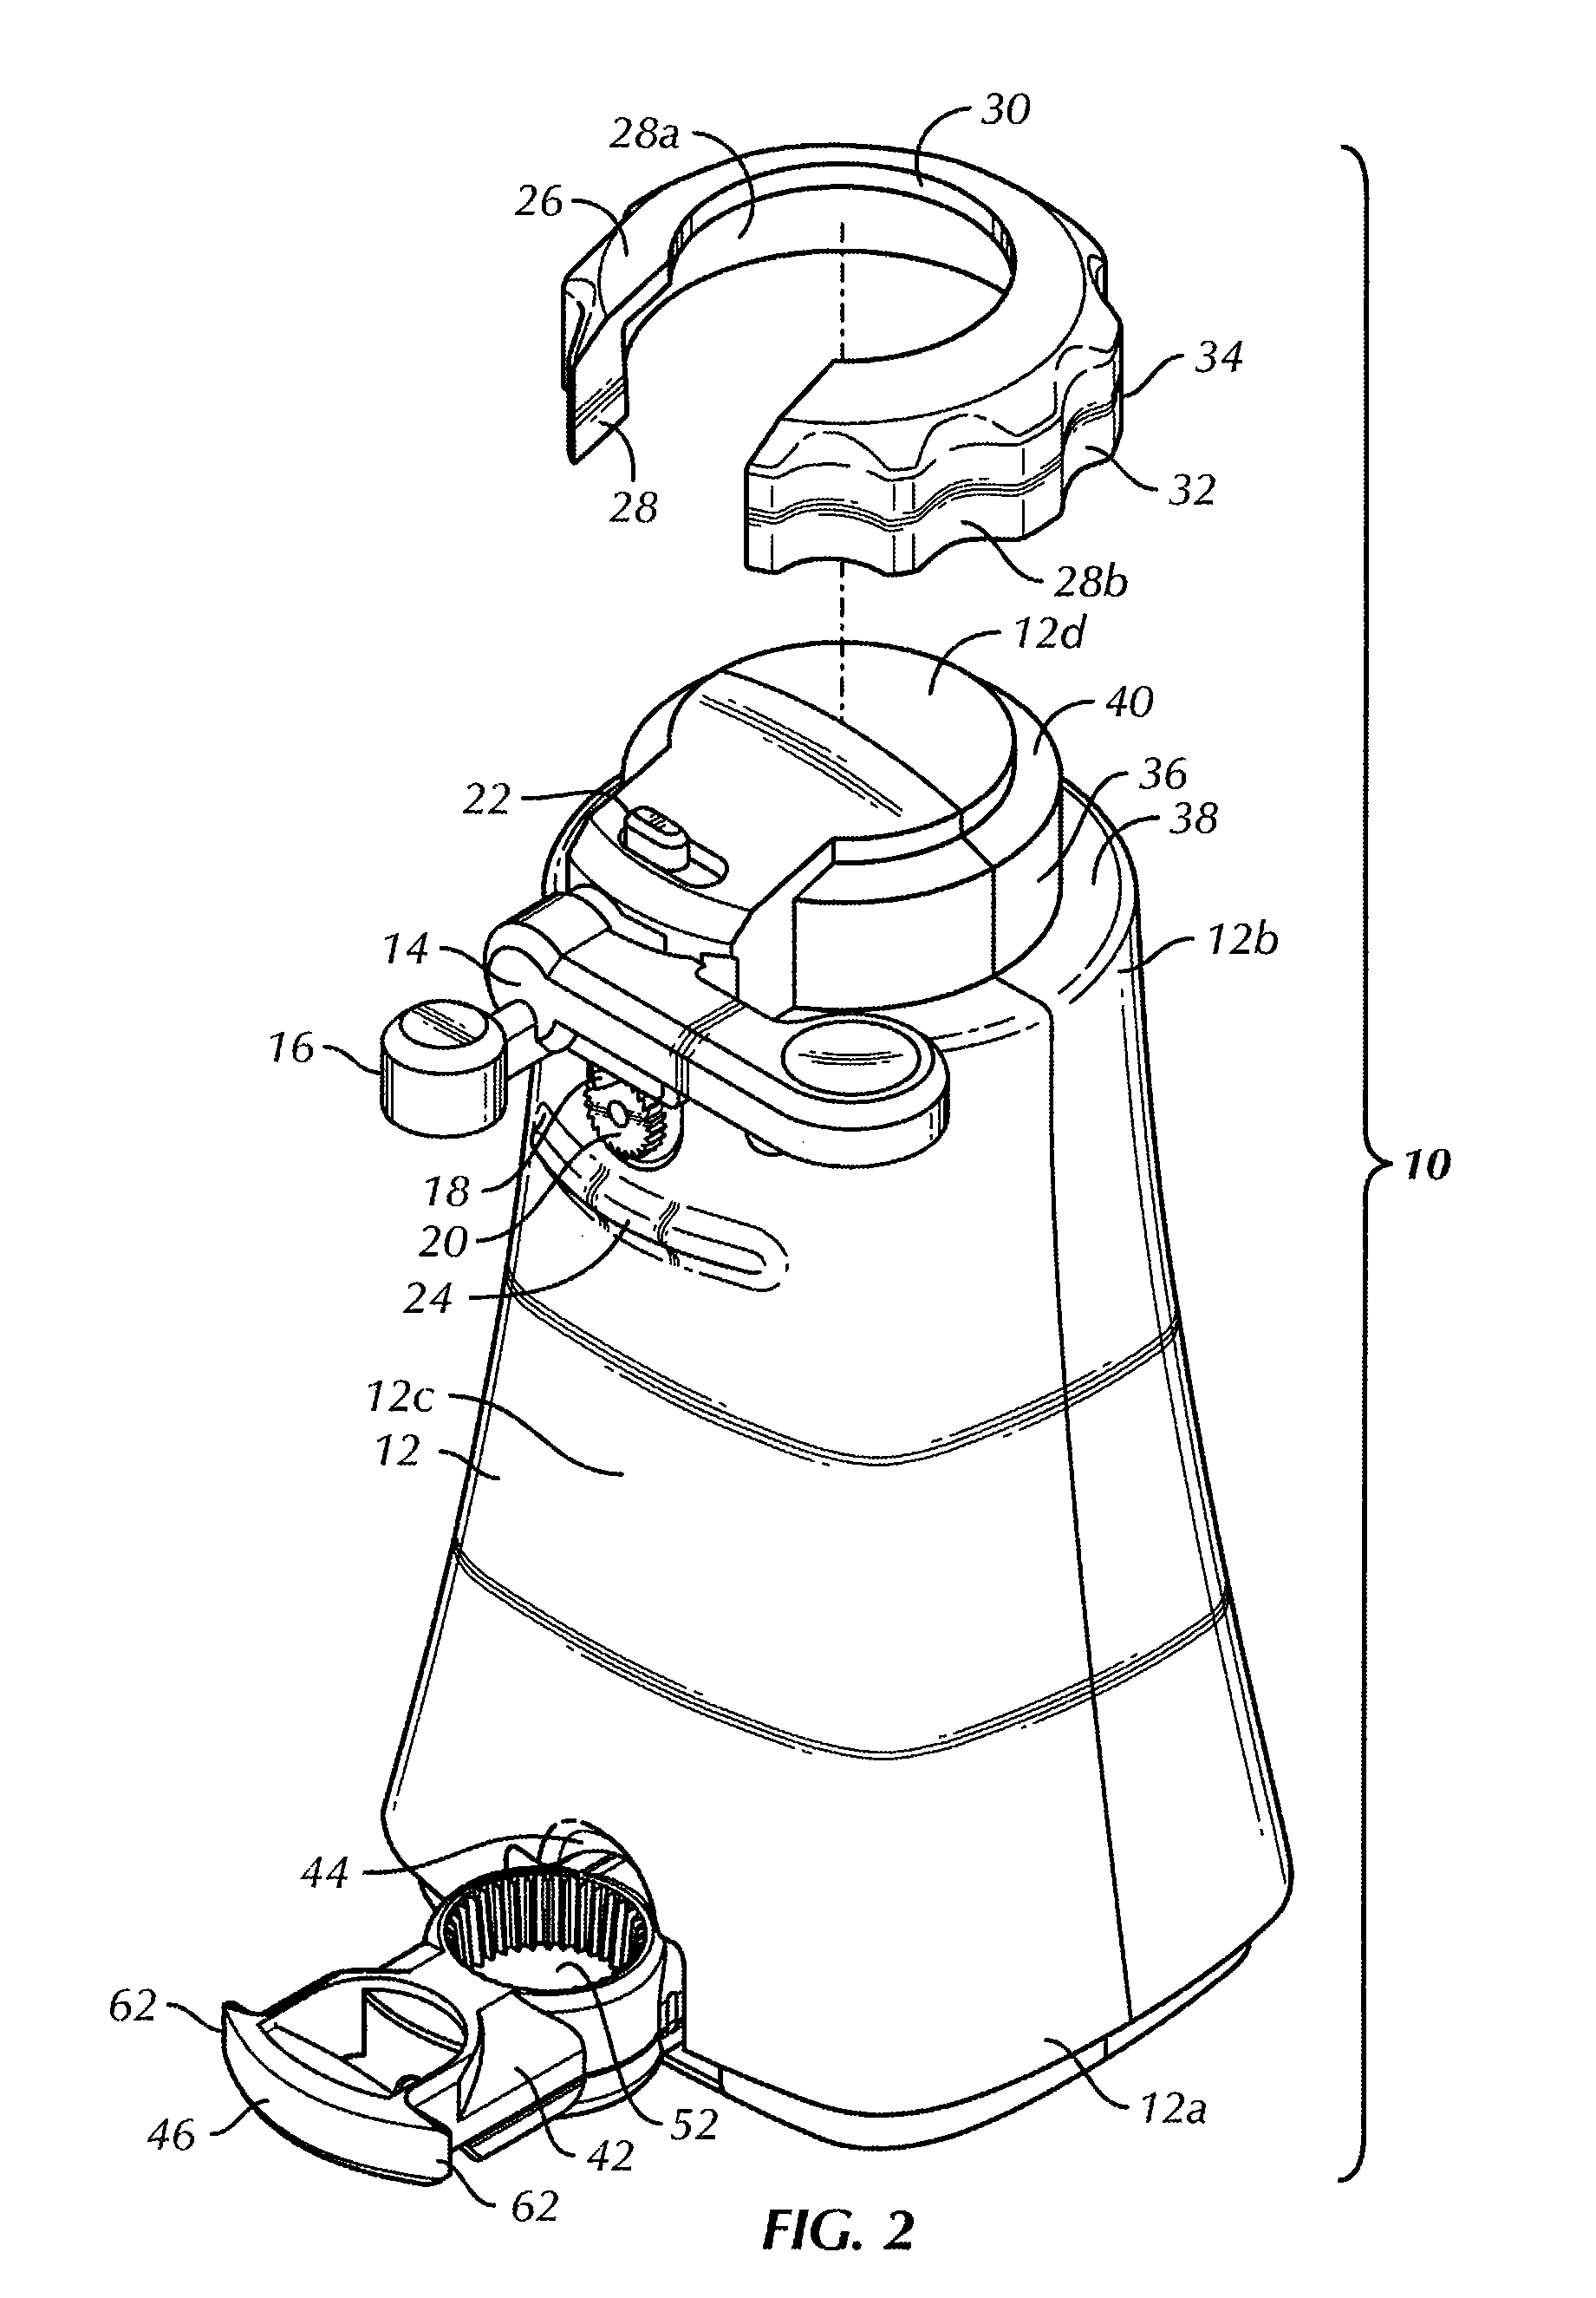 Electric can opener having removable opener tools